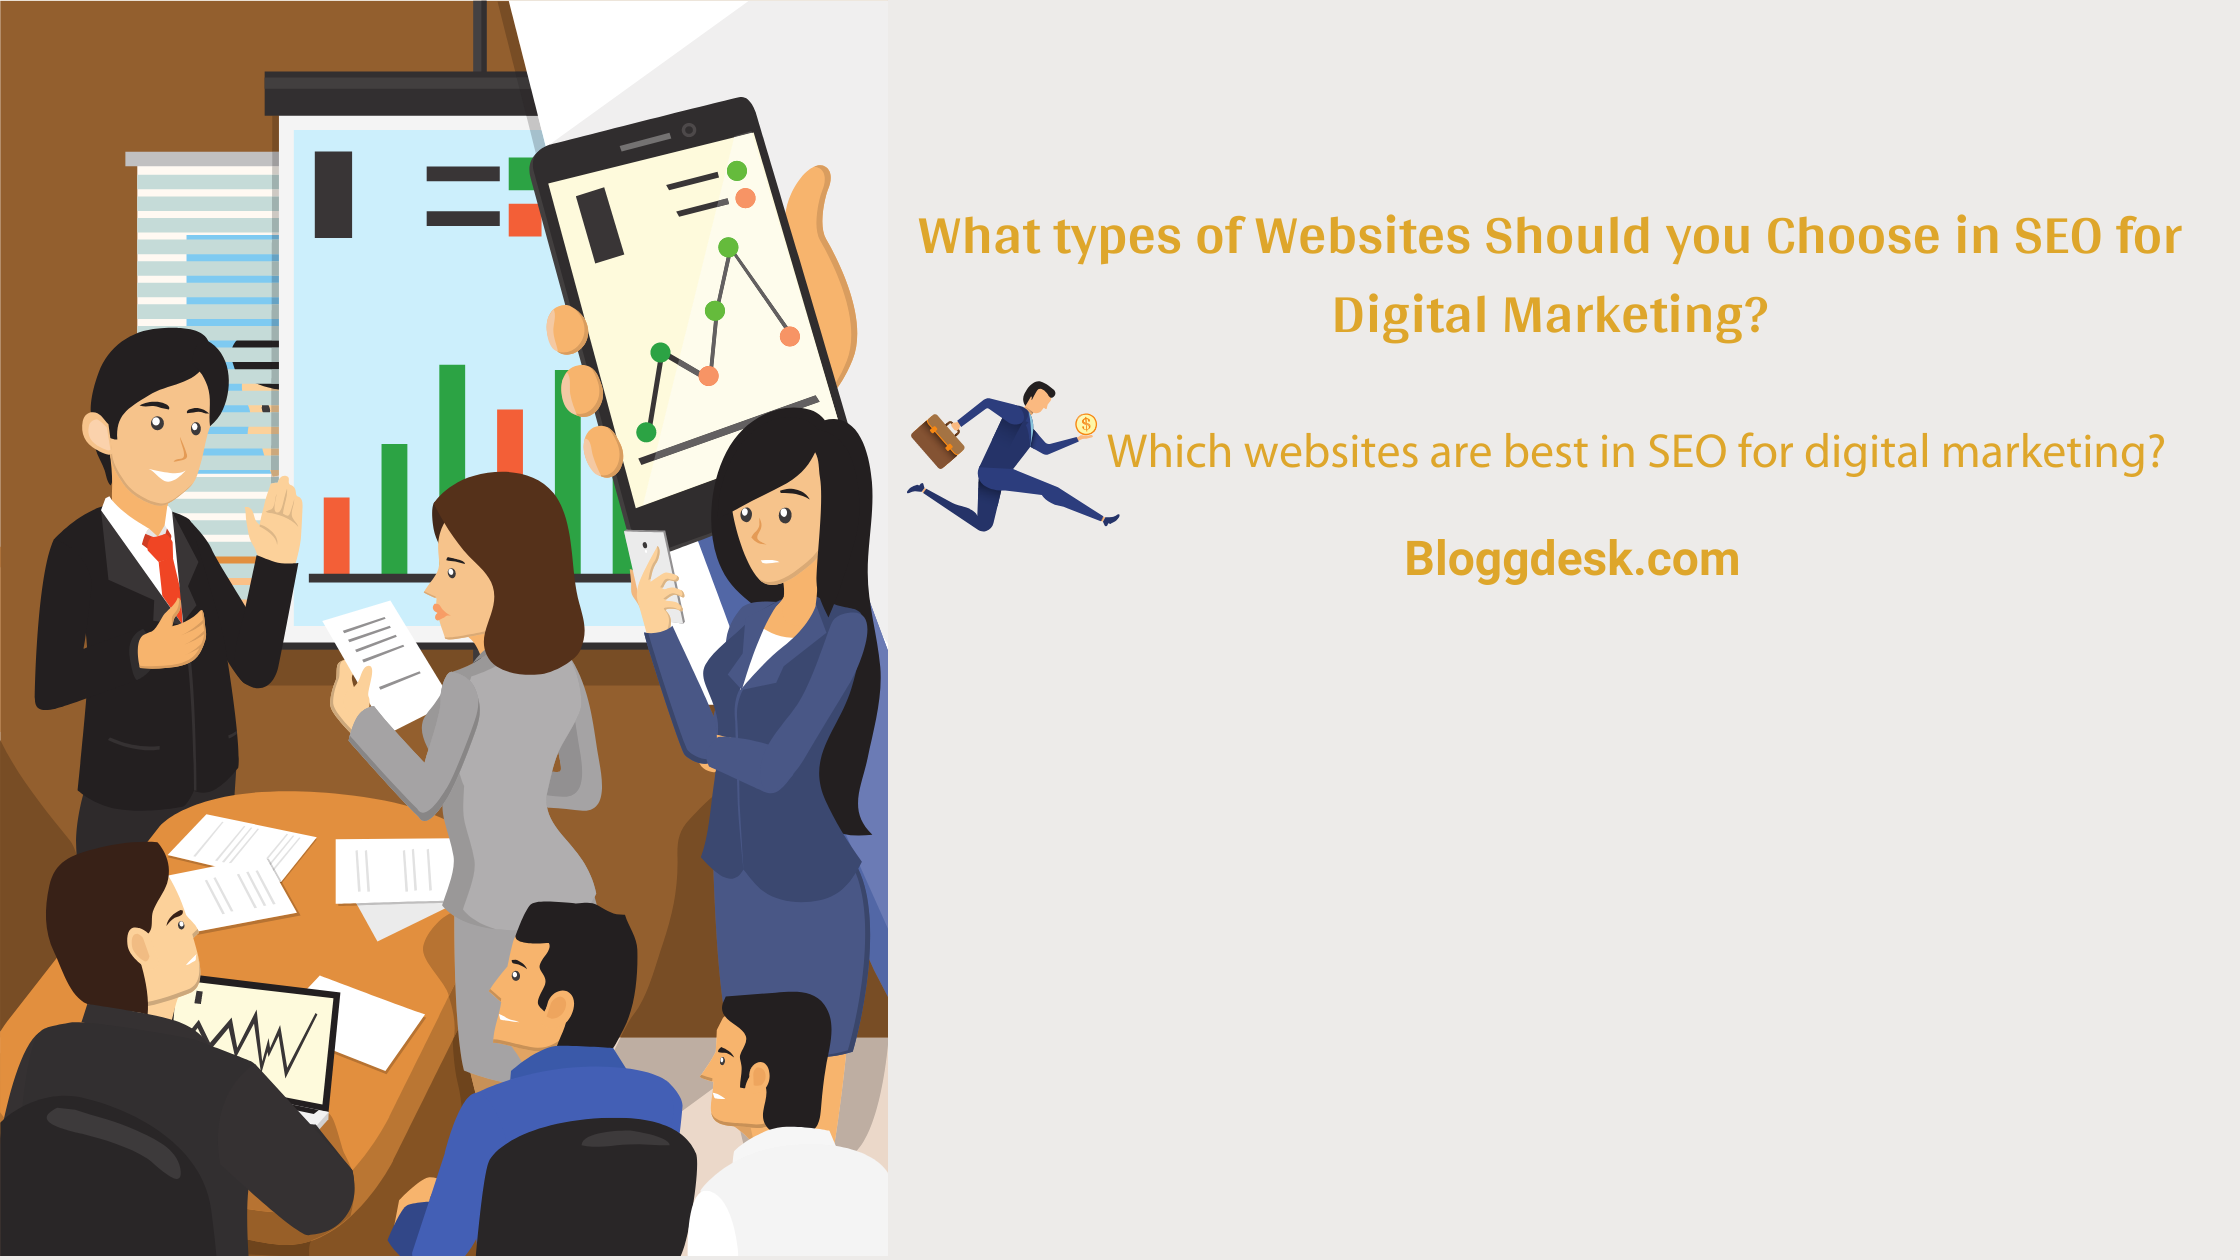 What types of Websites Should you Choose in SEO for Digital Marketing?